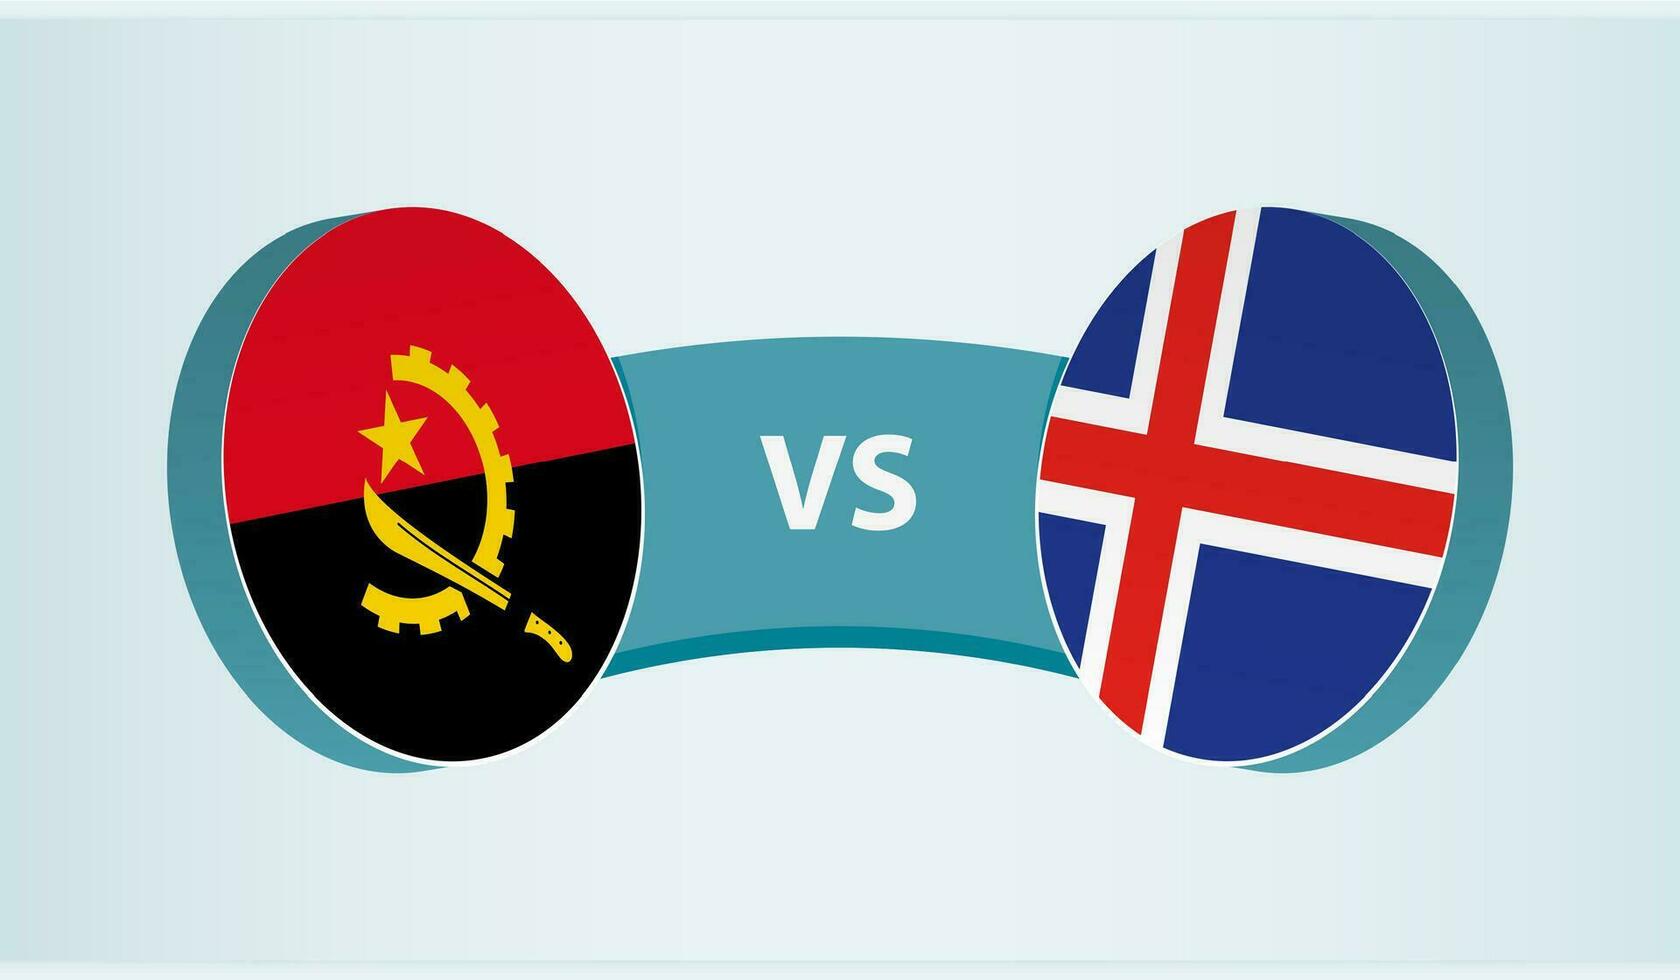 Angola versus Iceland, team sports competition concept. vector